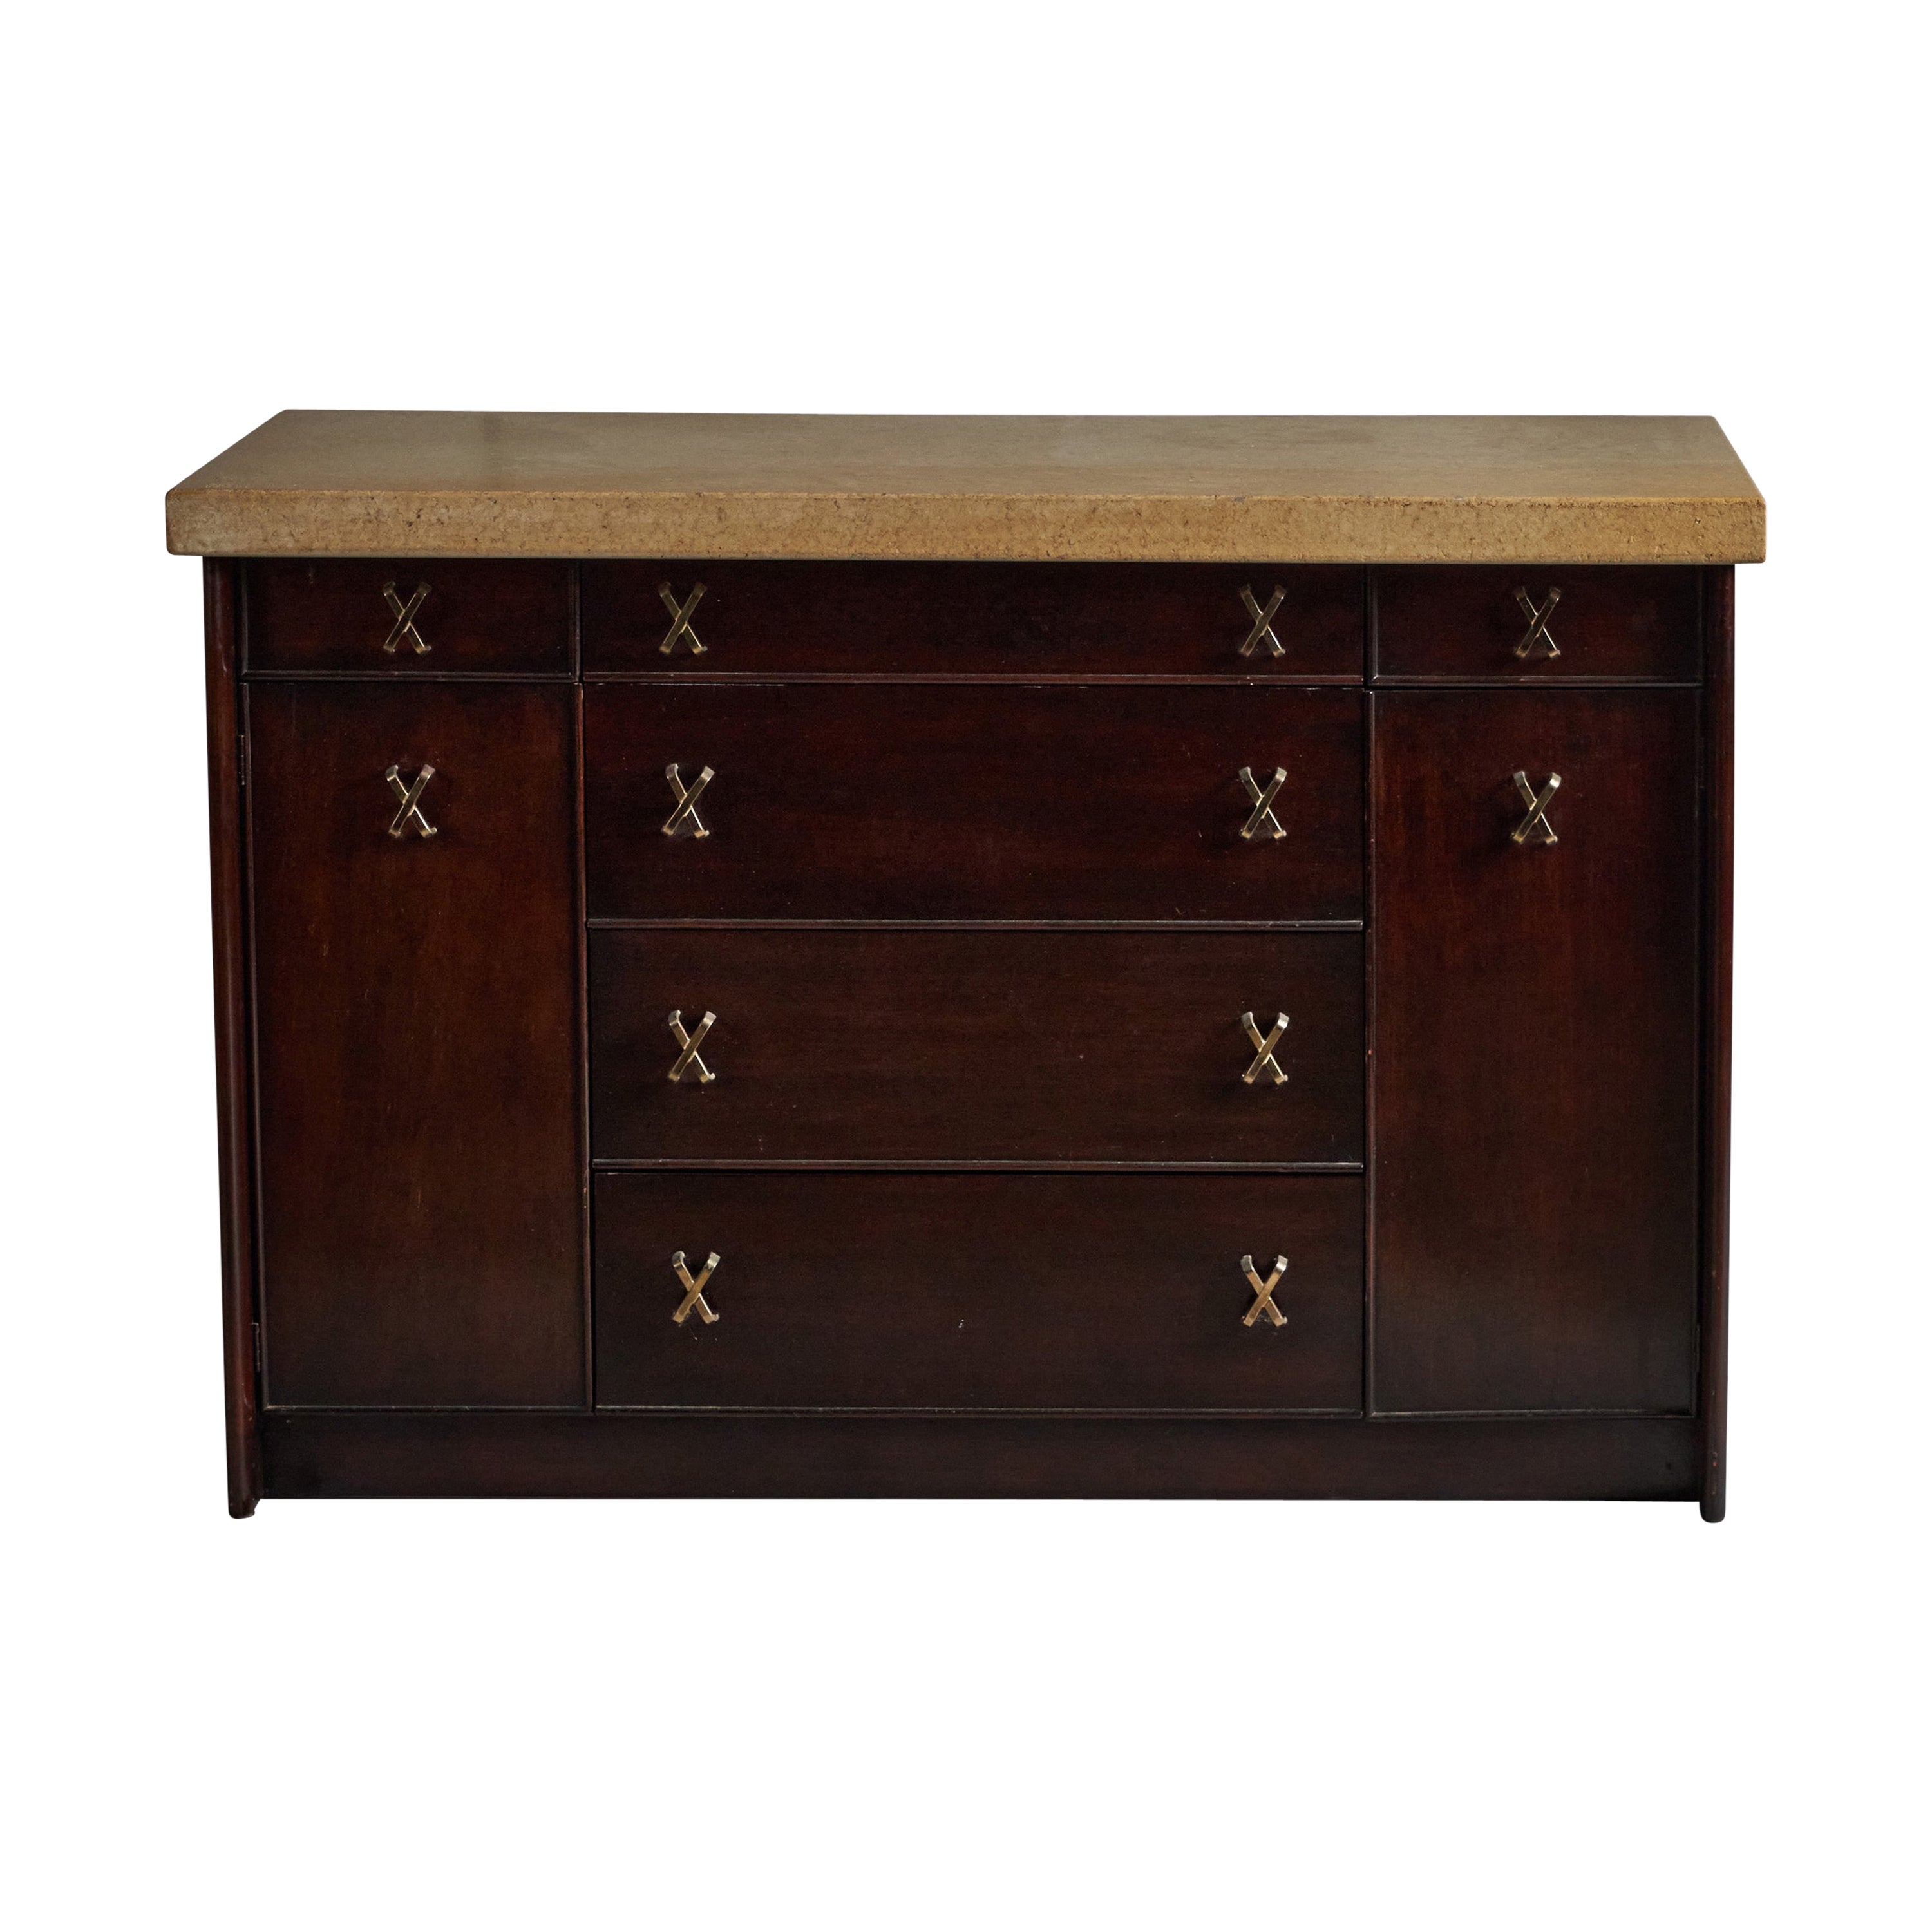 Paul Frankl, Cabinet, Mahogany, Brass, Cork, USA, 1950s For Sale